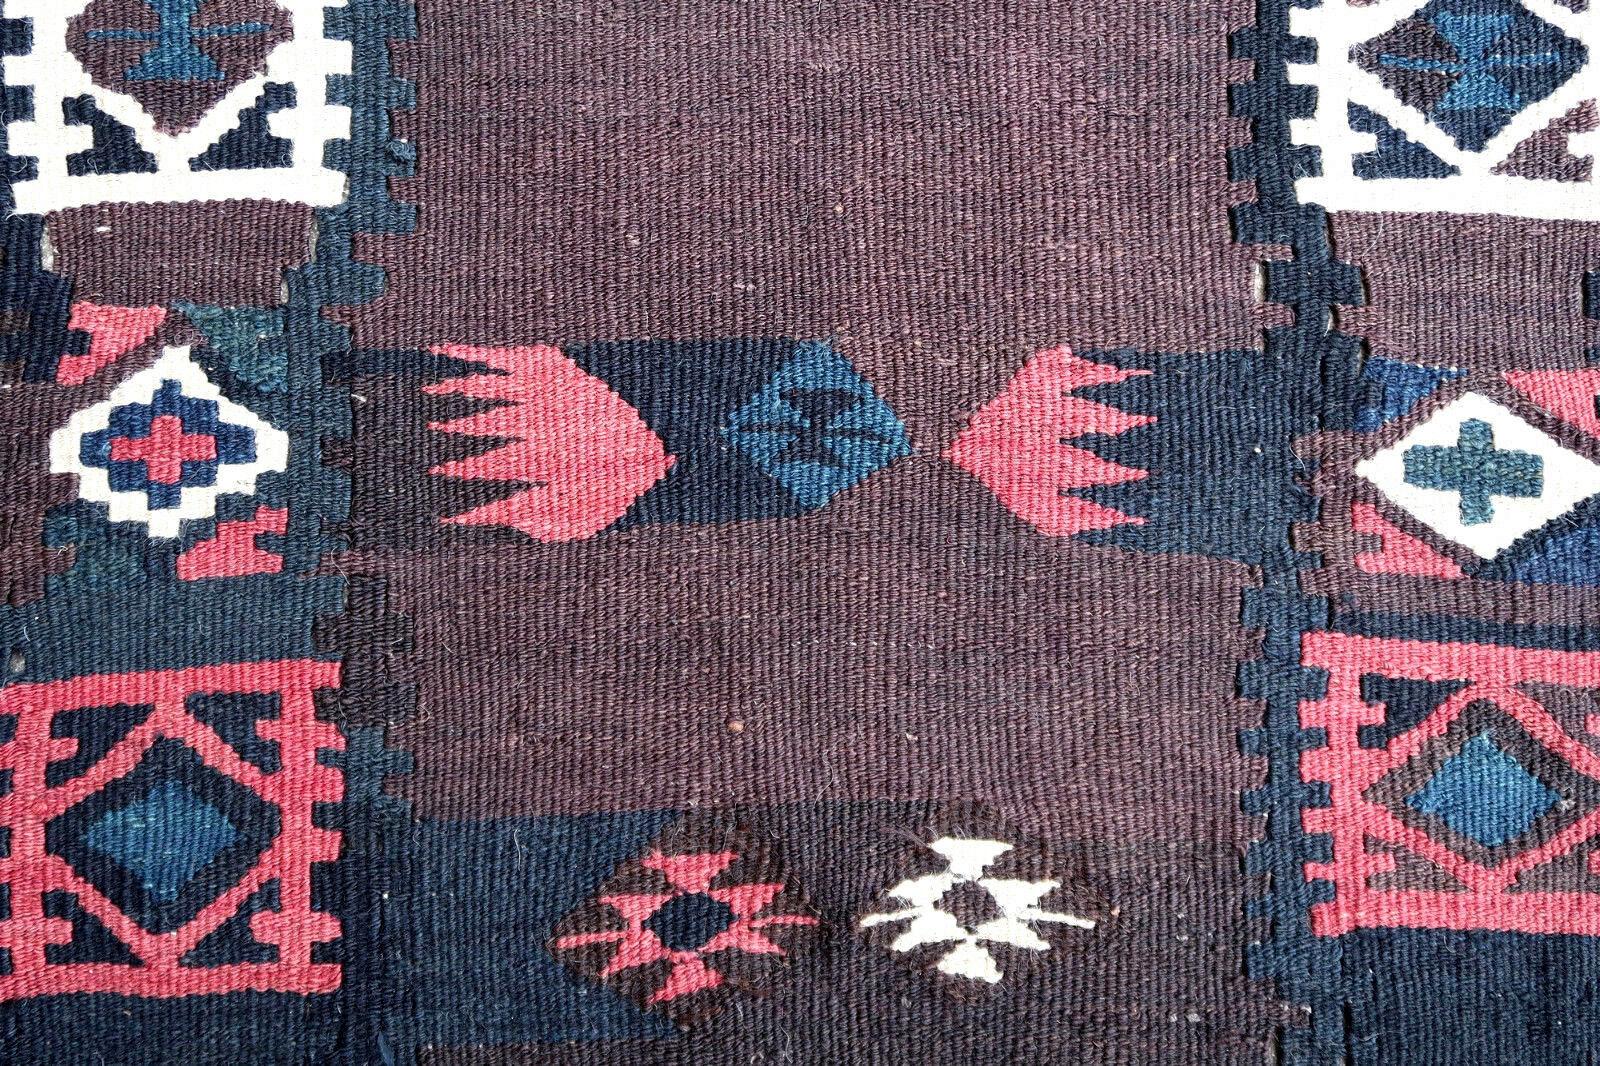 Handmade antique Veramin kilim runner original good condition. The rug is from the beginning of 20th century.

?- Condition: original good,

- circa 1900s,

- Size: 3' x 15' (92cm x 466cm),

- Material: wool,

- Country of origin: Middle